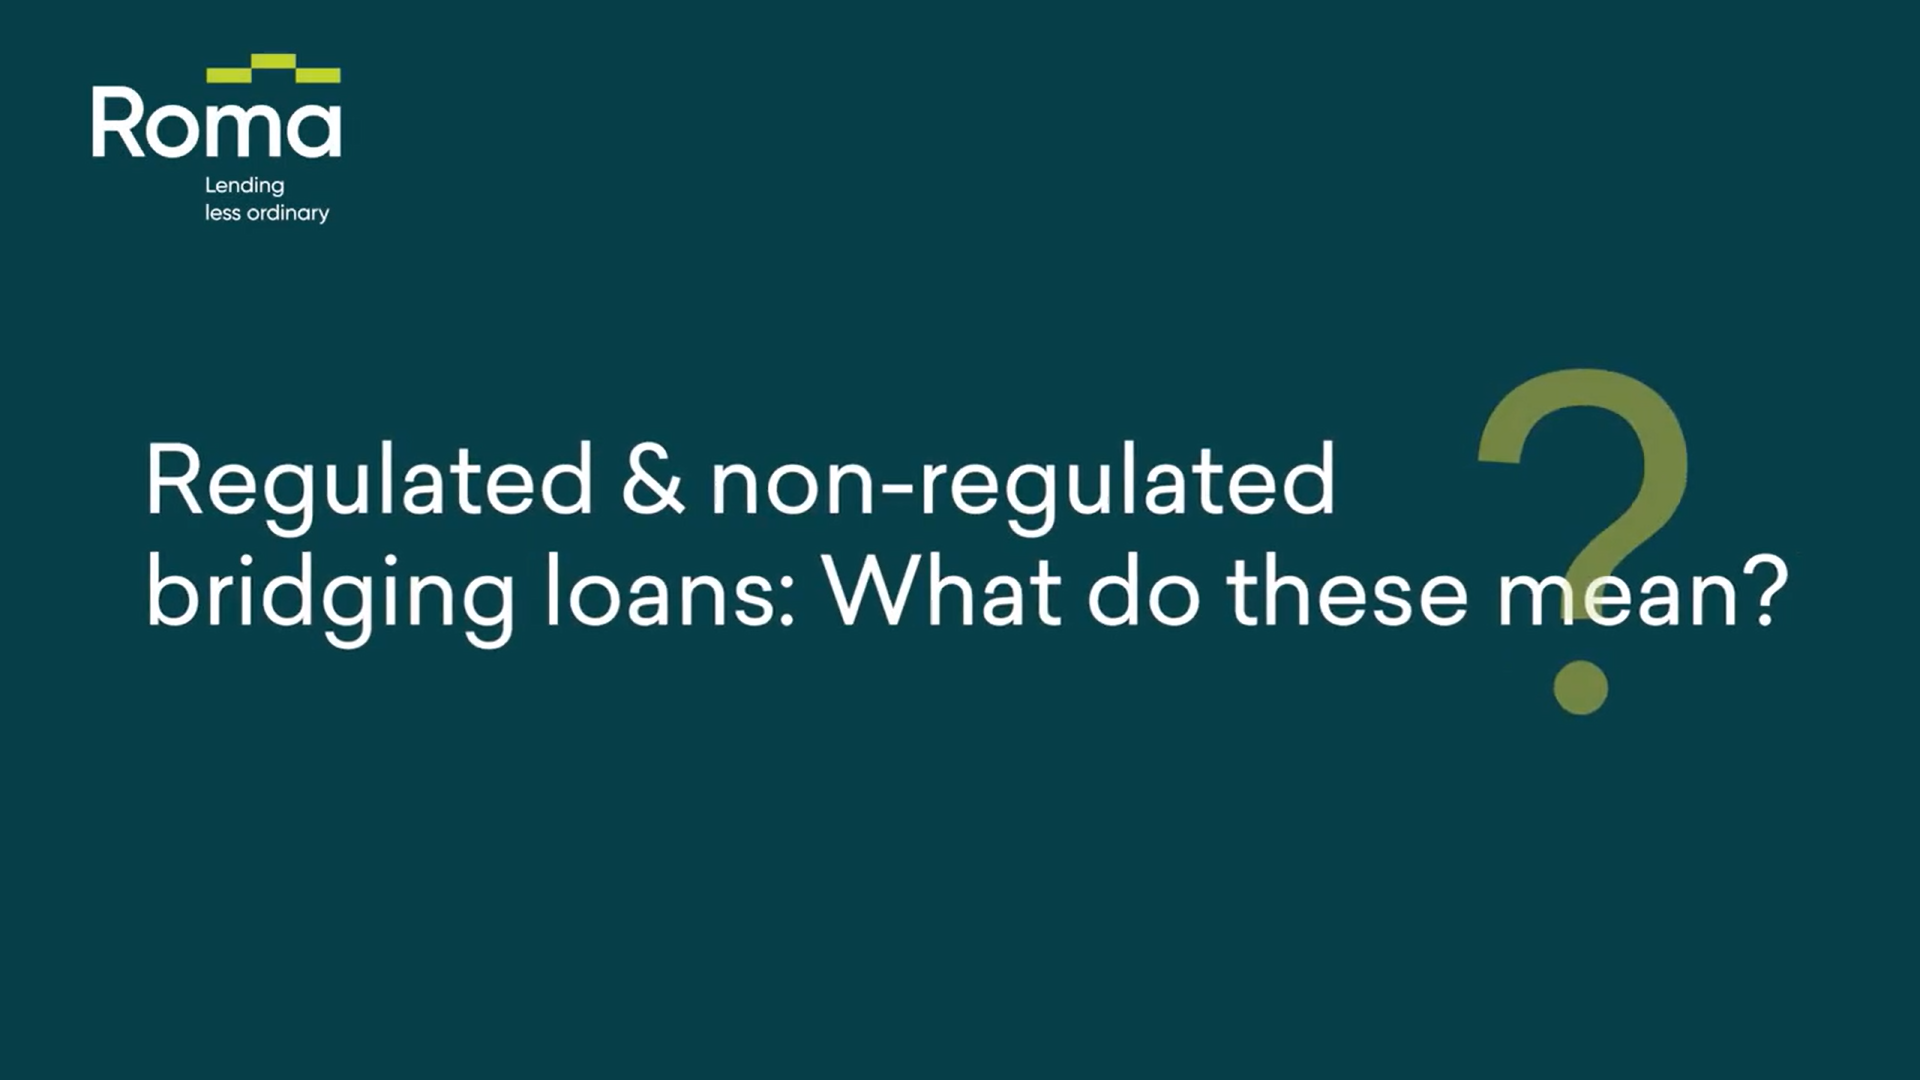 https://romafinance.co.uk/wp-content/uploads/2022/06/Regulated-and-non-regulated-bridging.png